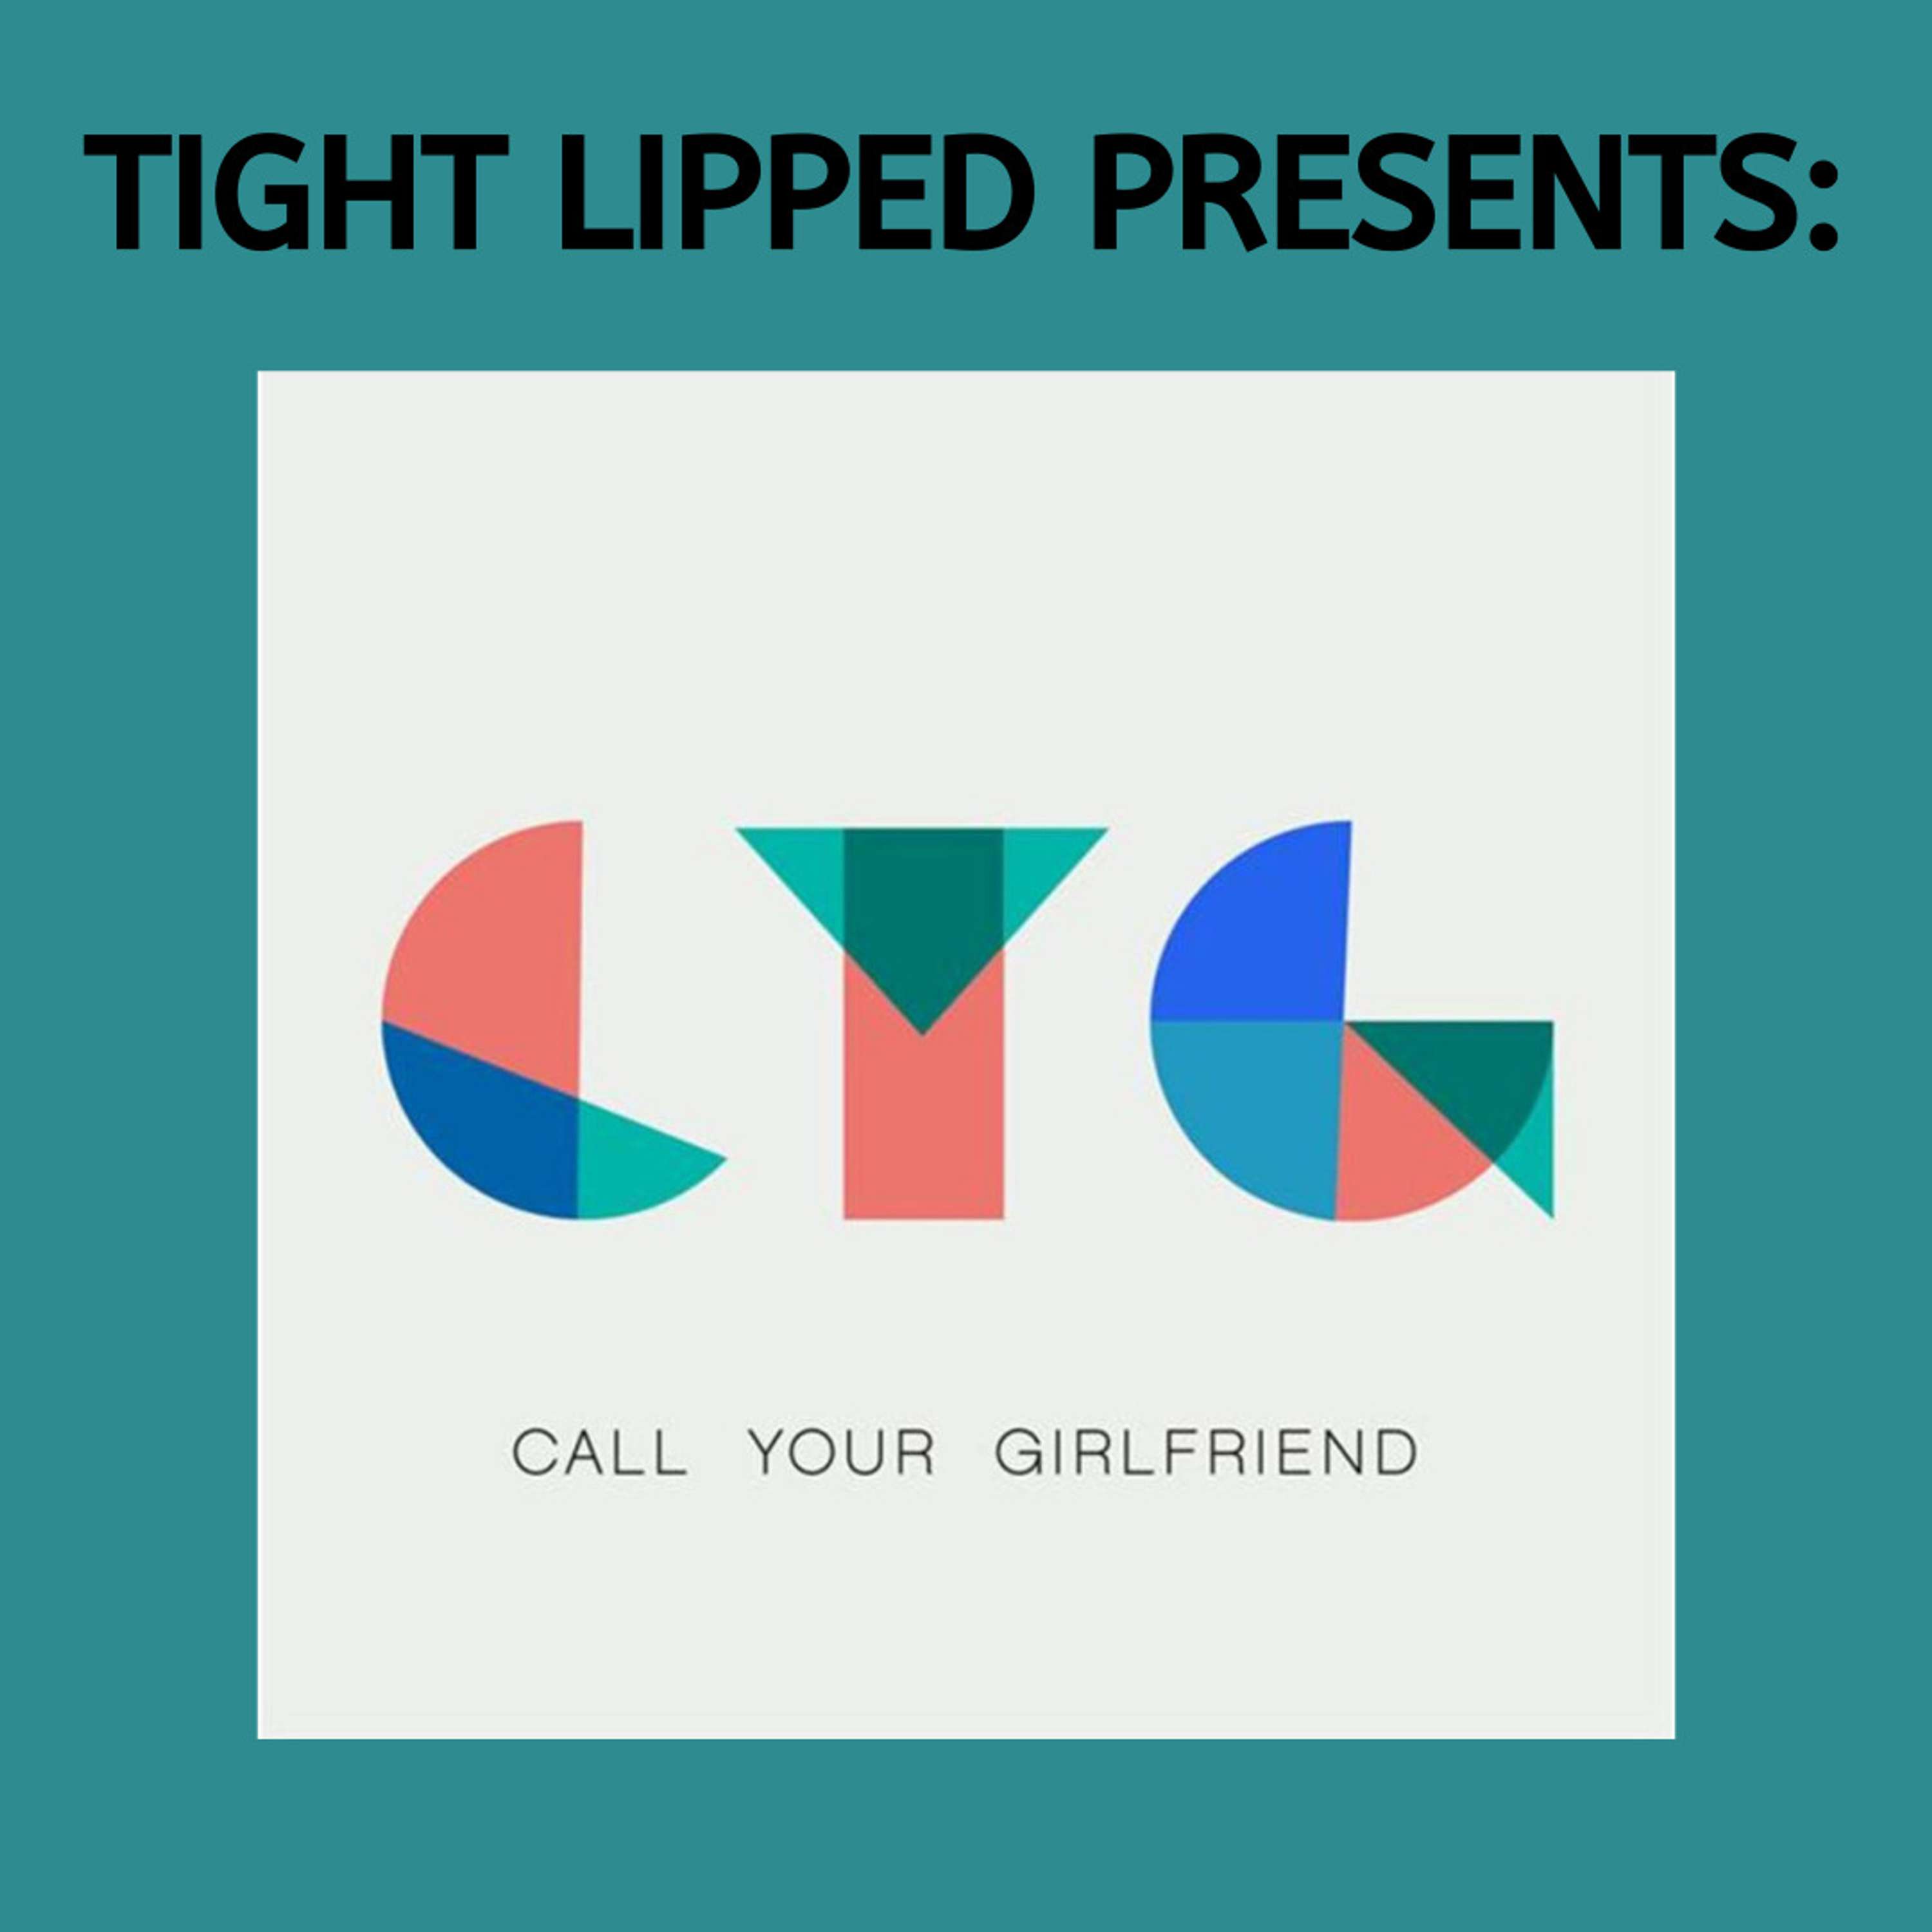 Tight Lipped Presents: Call Your Girlfriend